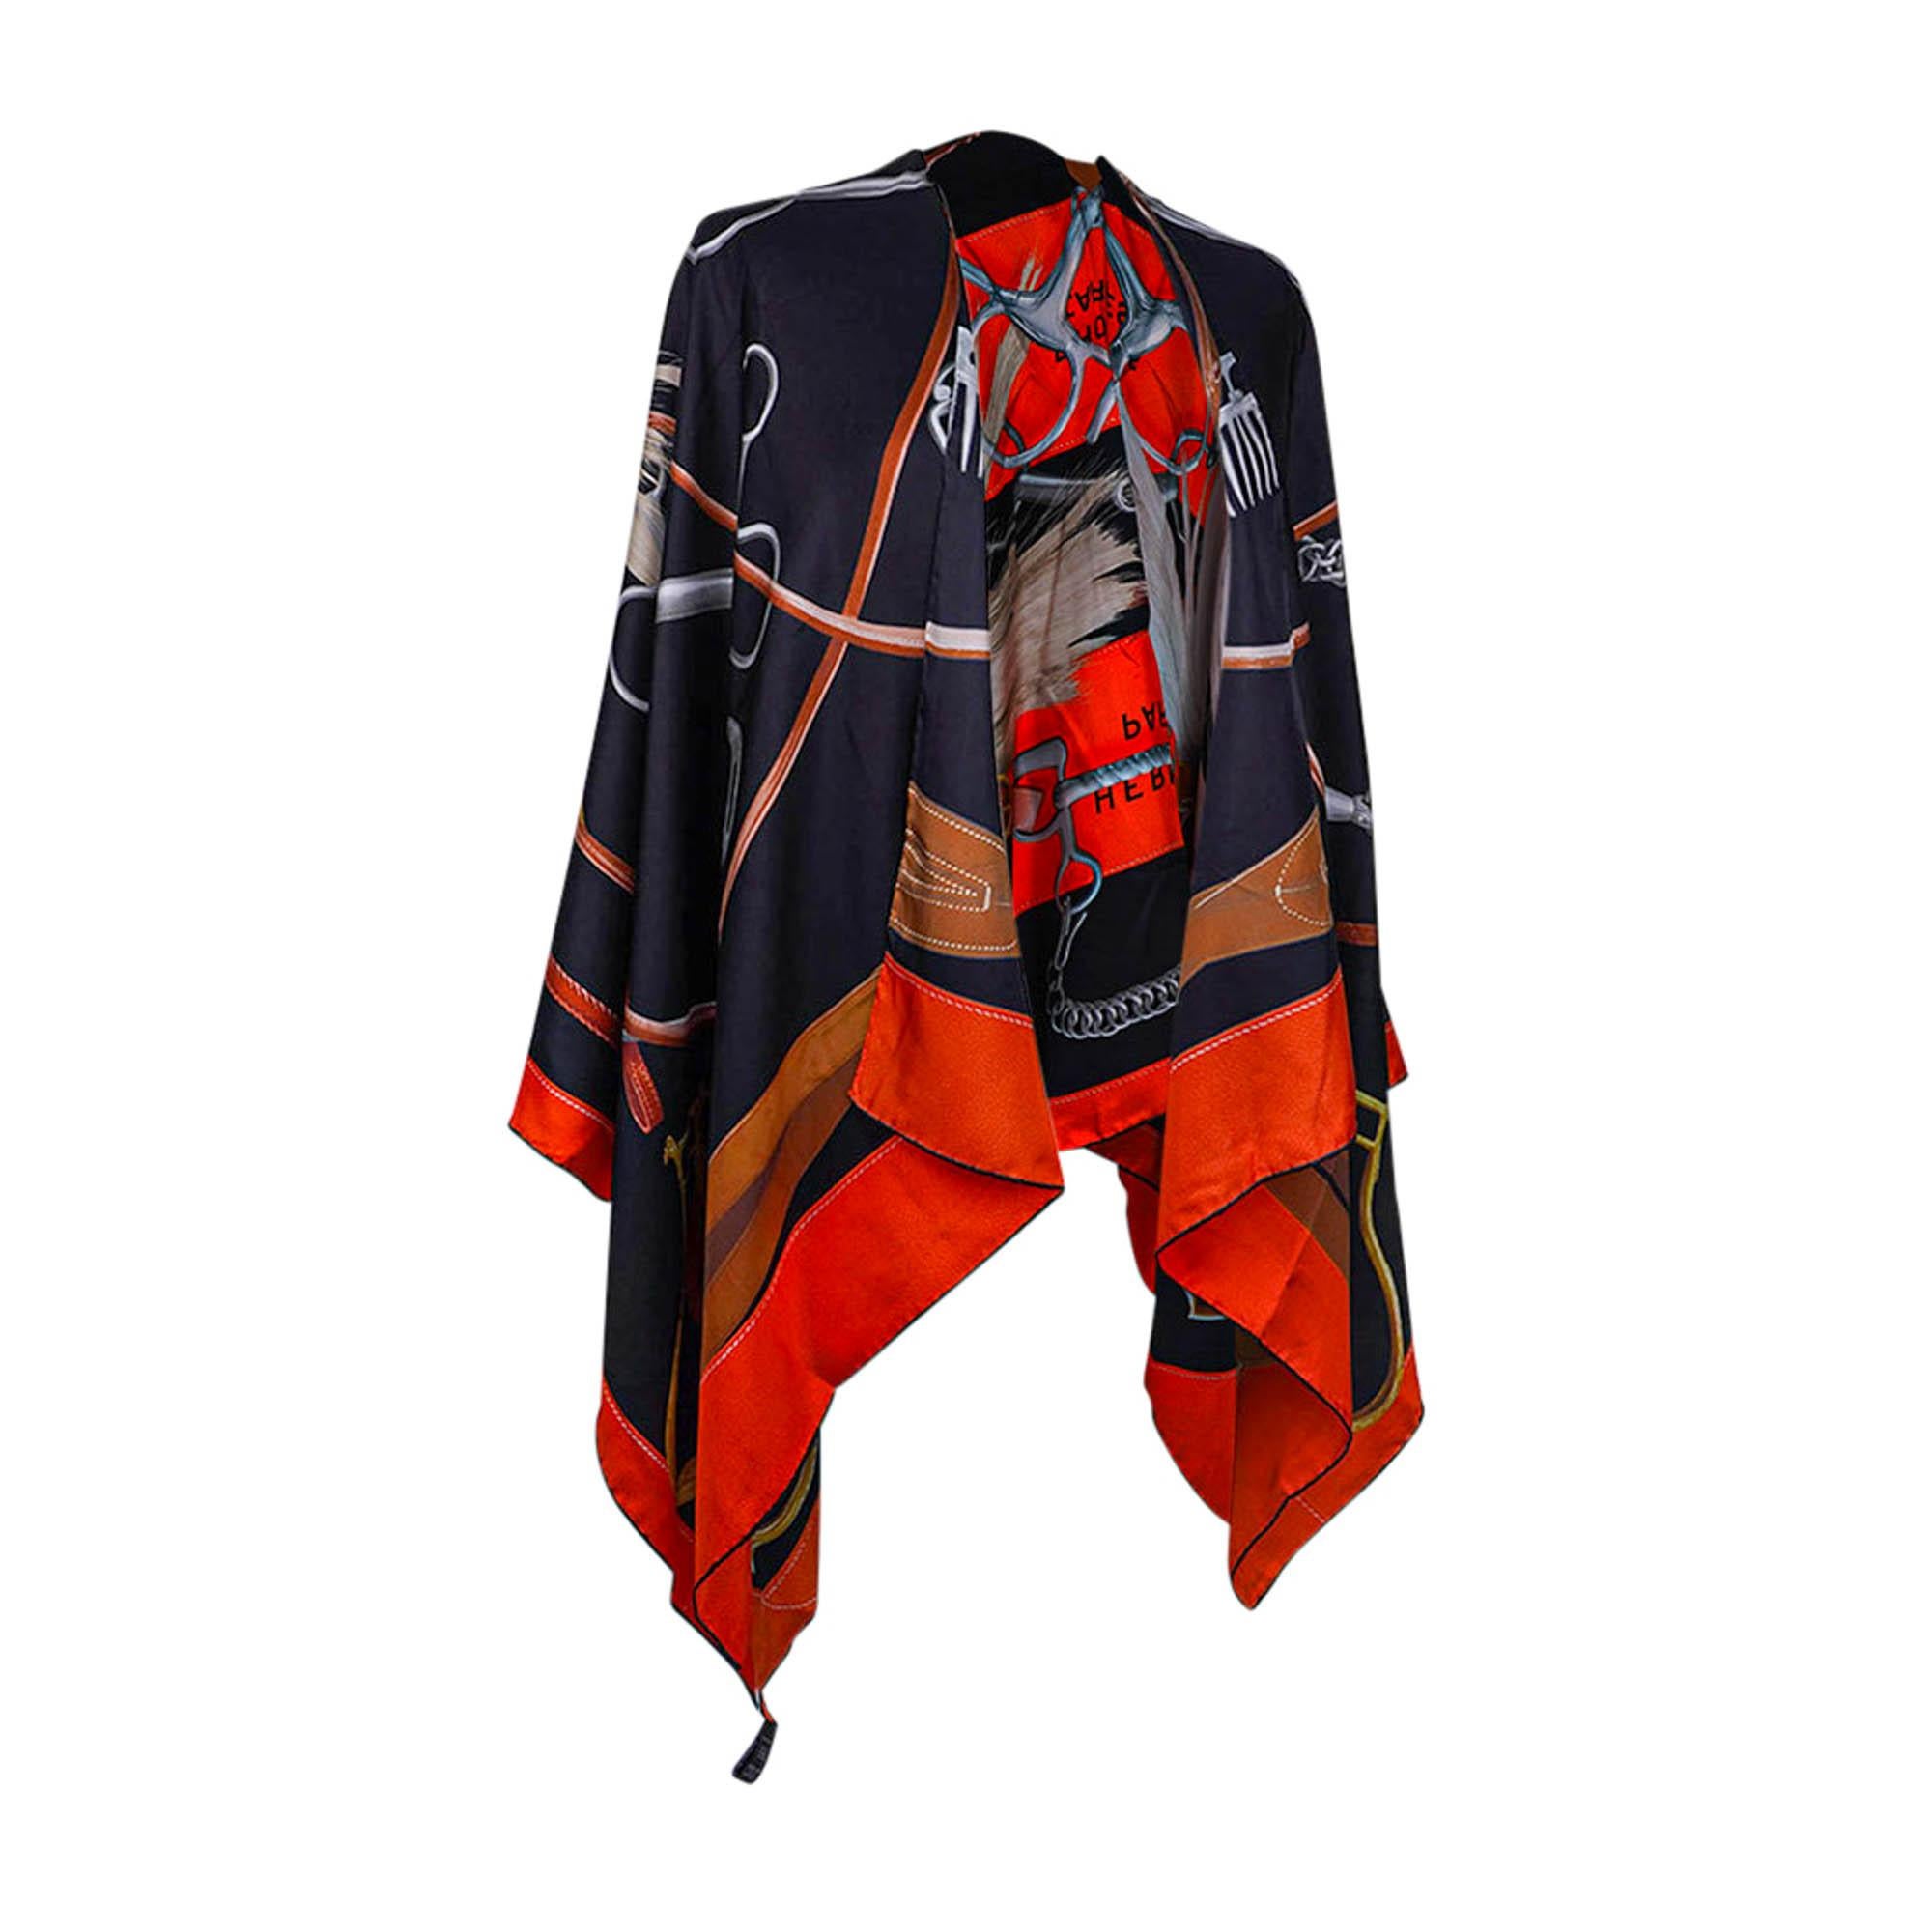 Mightychic offers an Hermes Projets Carres Poncho featured in Black, Orange and Brun colorway.
The cutout, with lambskin leather tab, transforms this large scarf into a beautiful Poncho.
Depicts an array of elegant accessories for the horse.
Mane